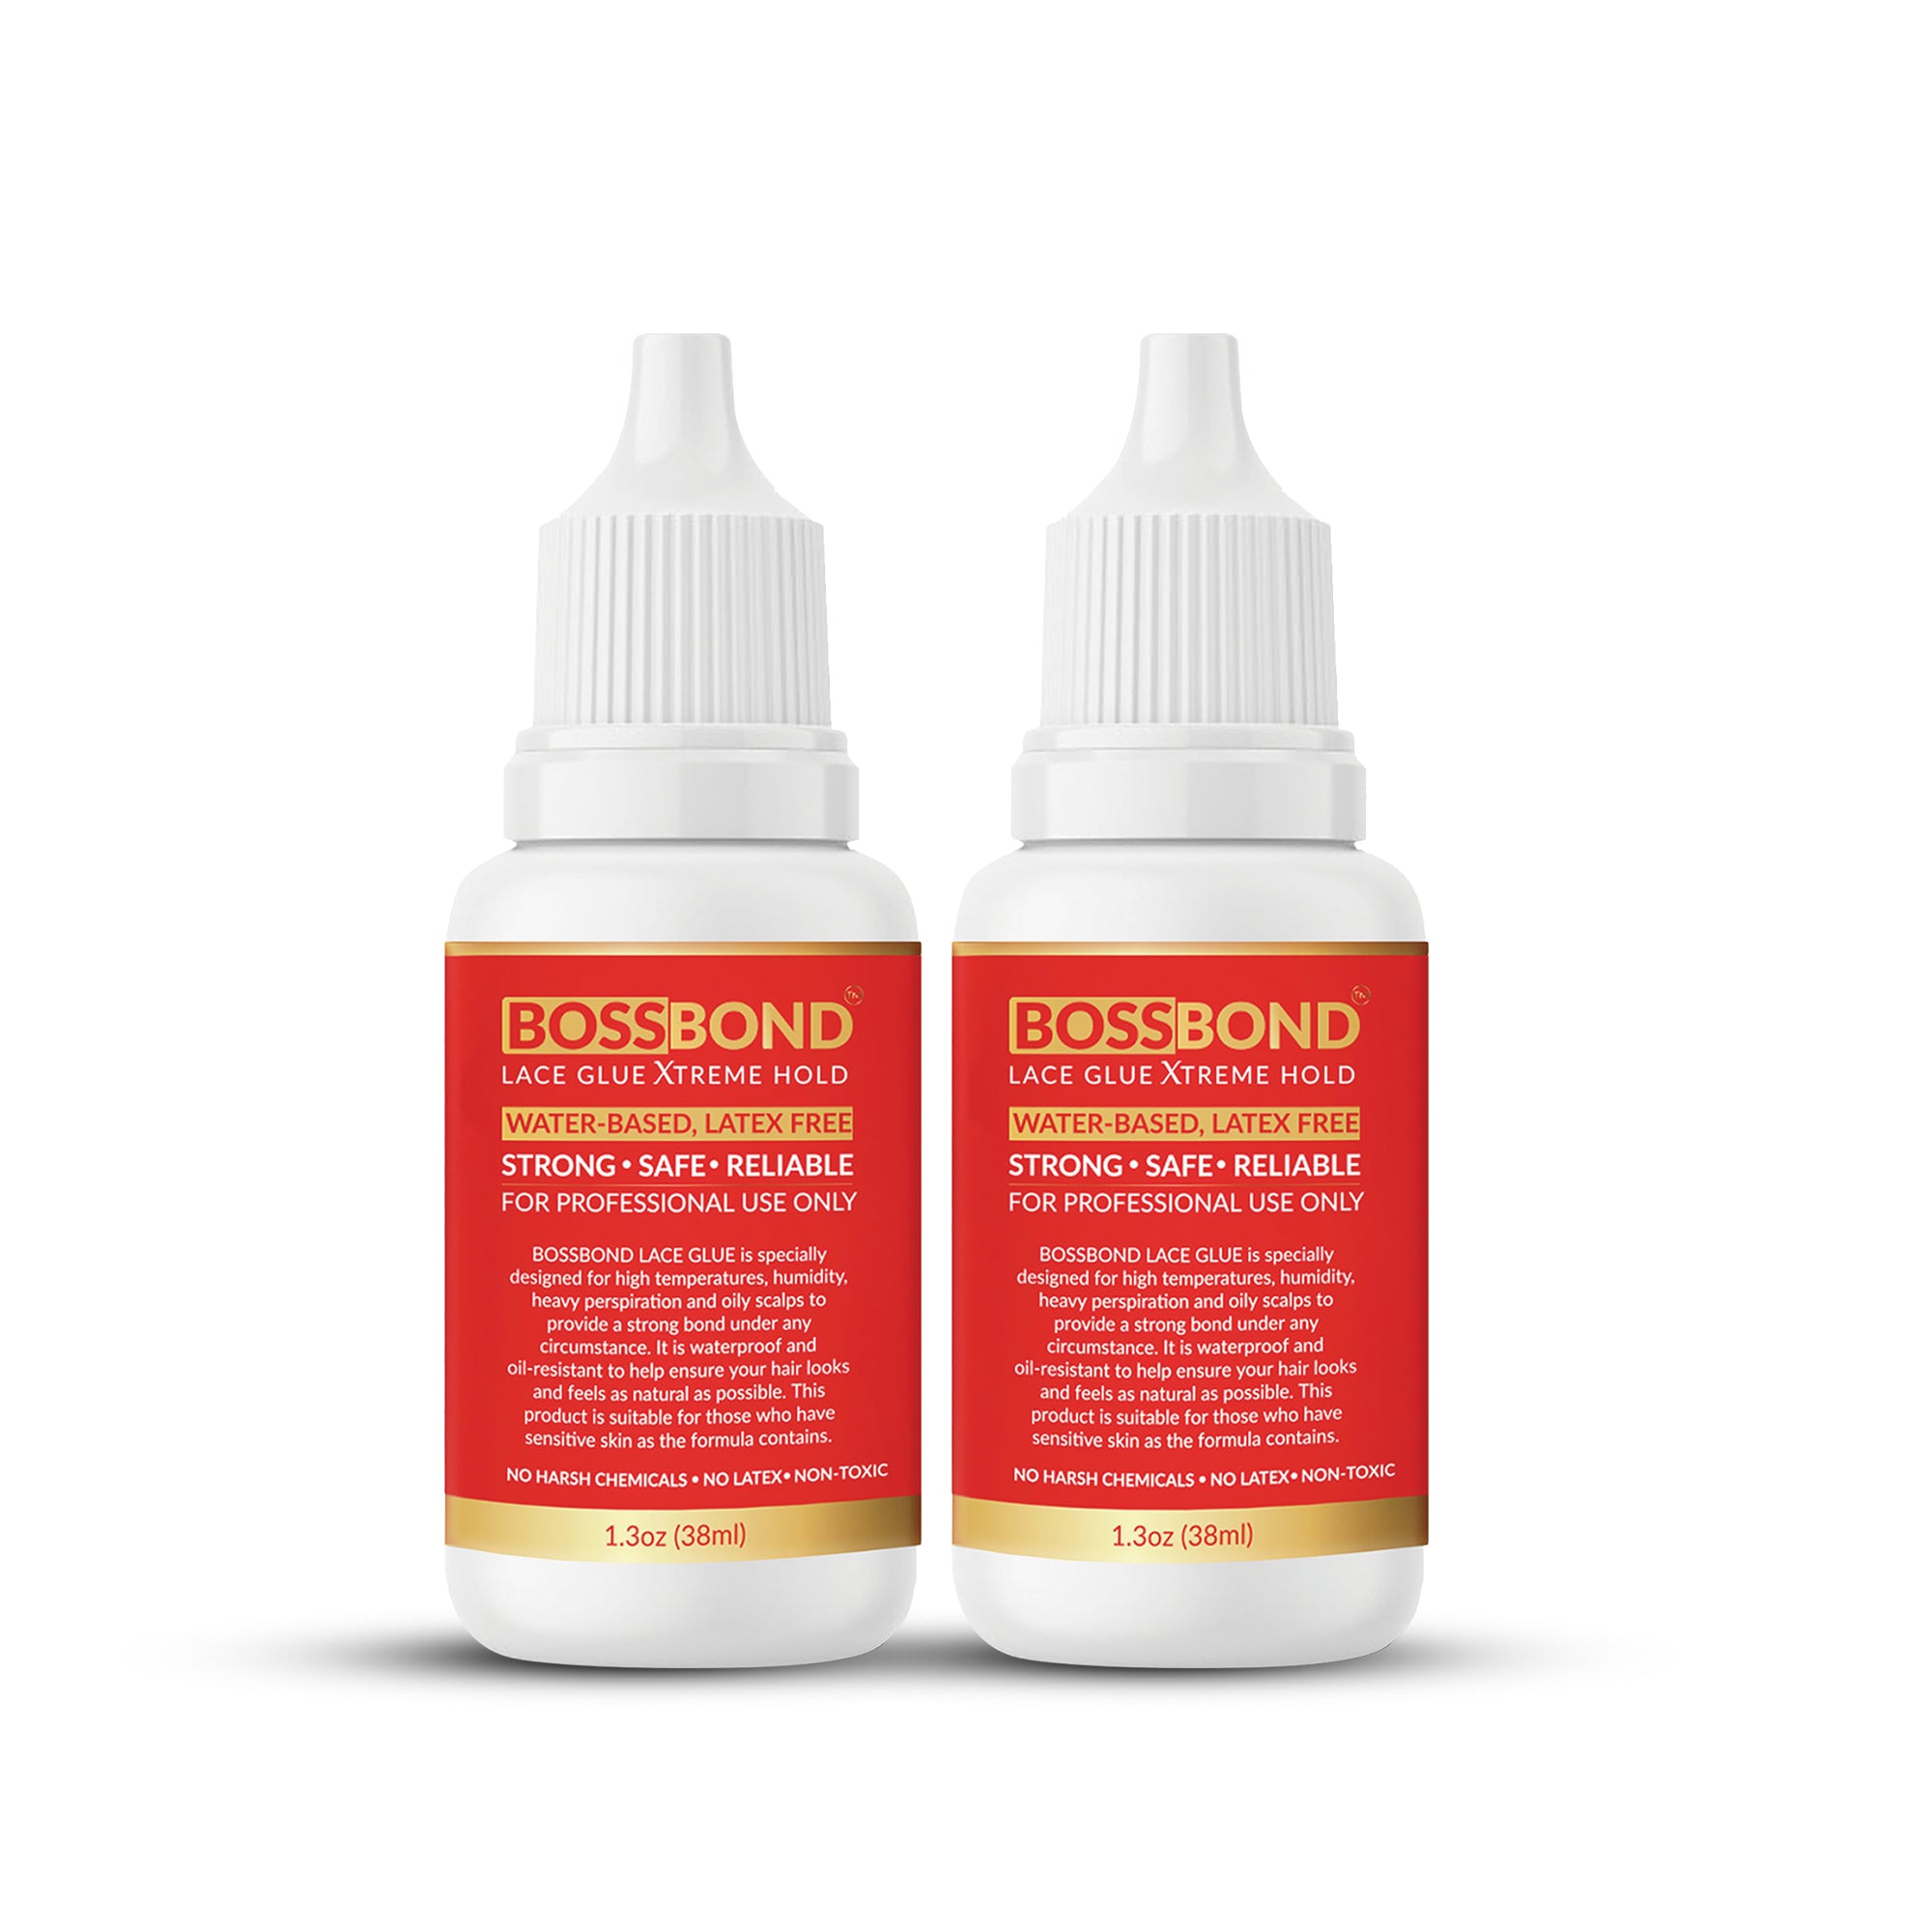 BOSSBOND Xtreme hold Lace Glue Pack of 2 (1.3 Fl oz)